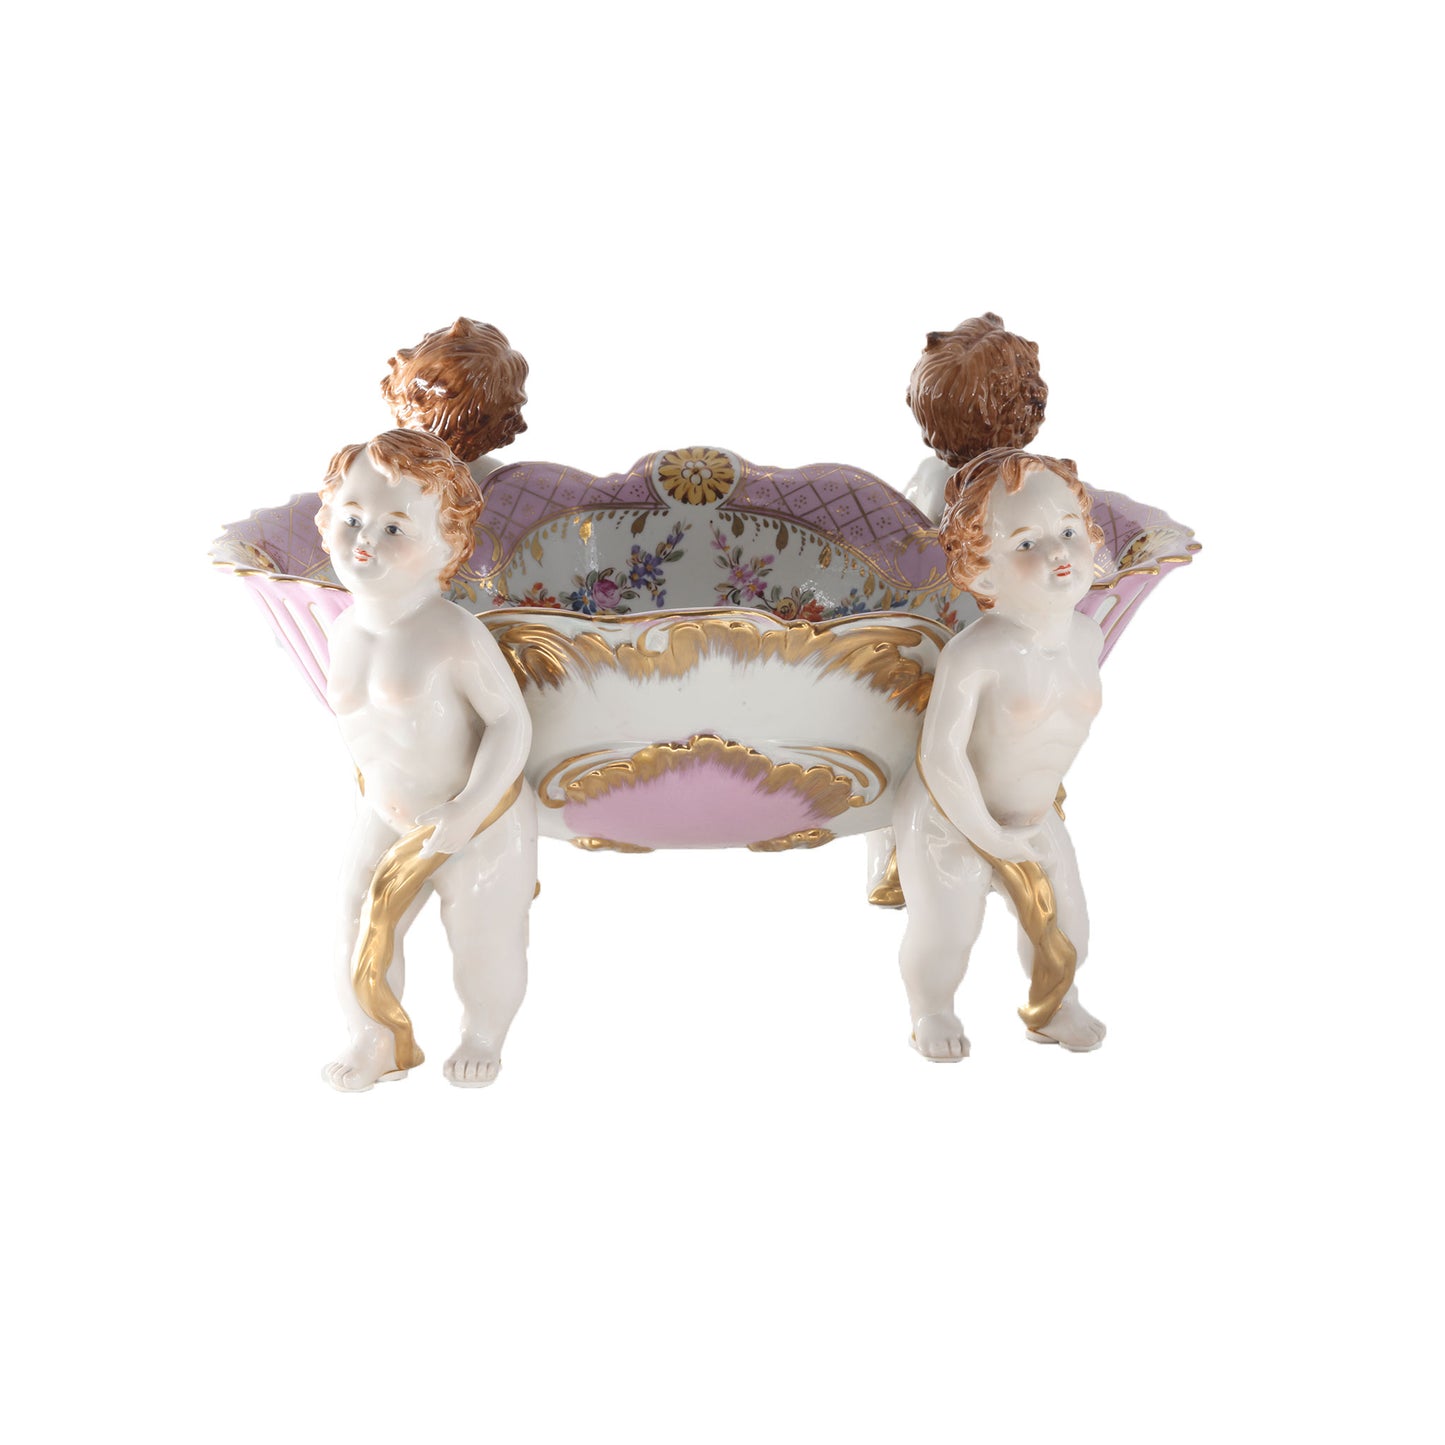 Hand-painted Four Cherub Pulling in Pink